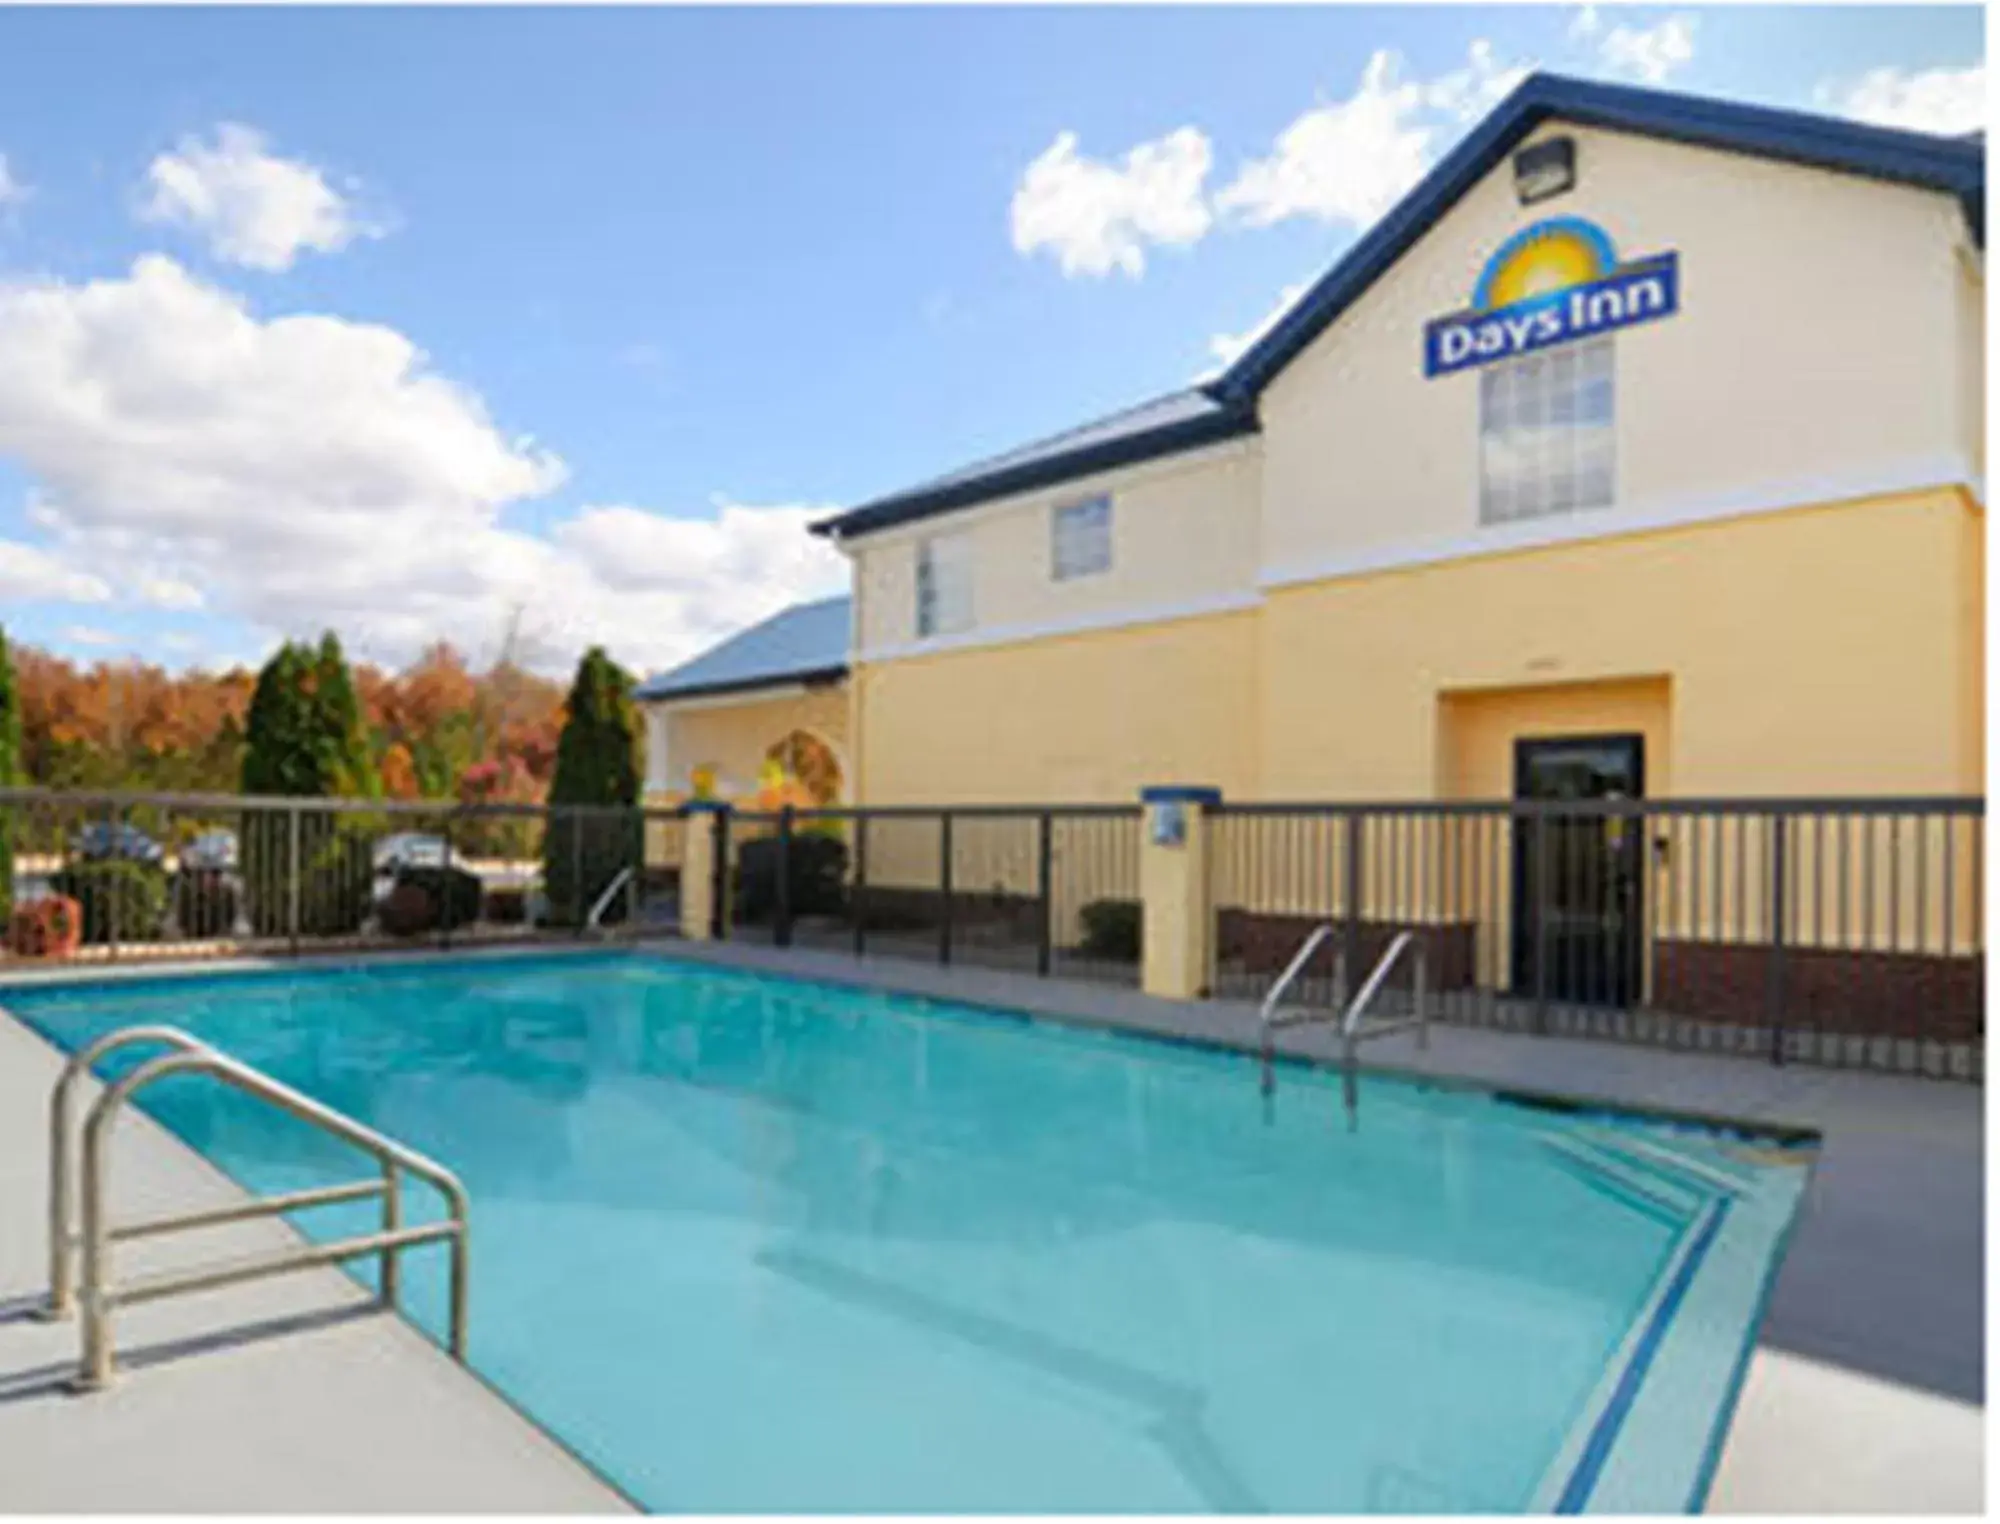 Swimming pool, Property Building in Days Inn by Wyndham Lincoln